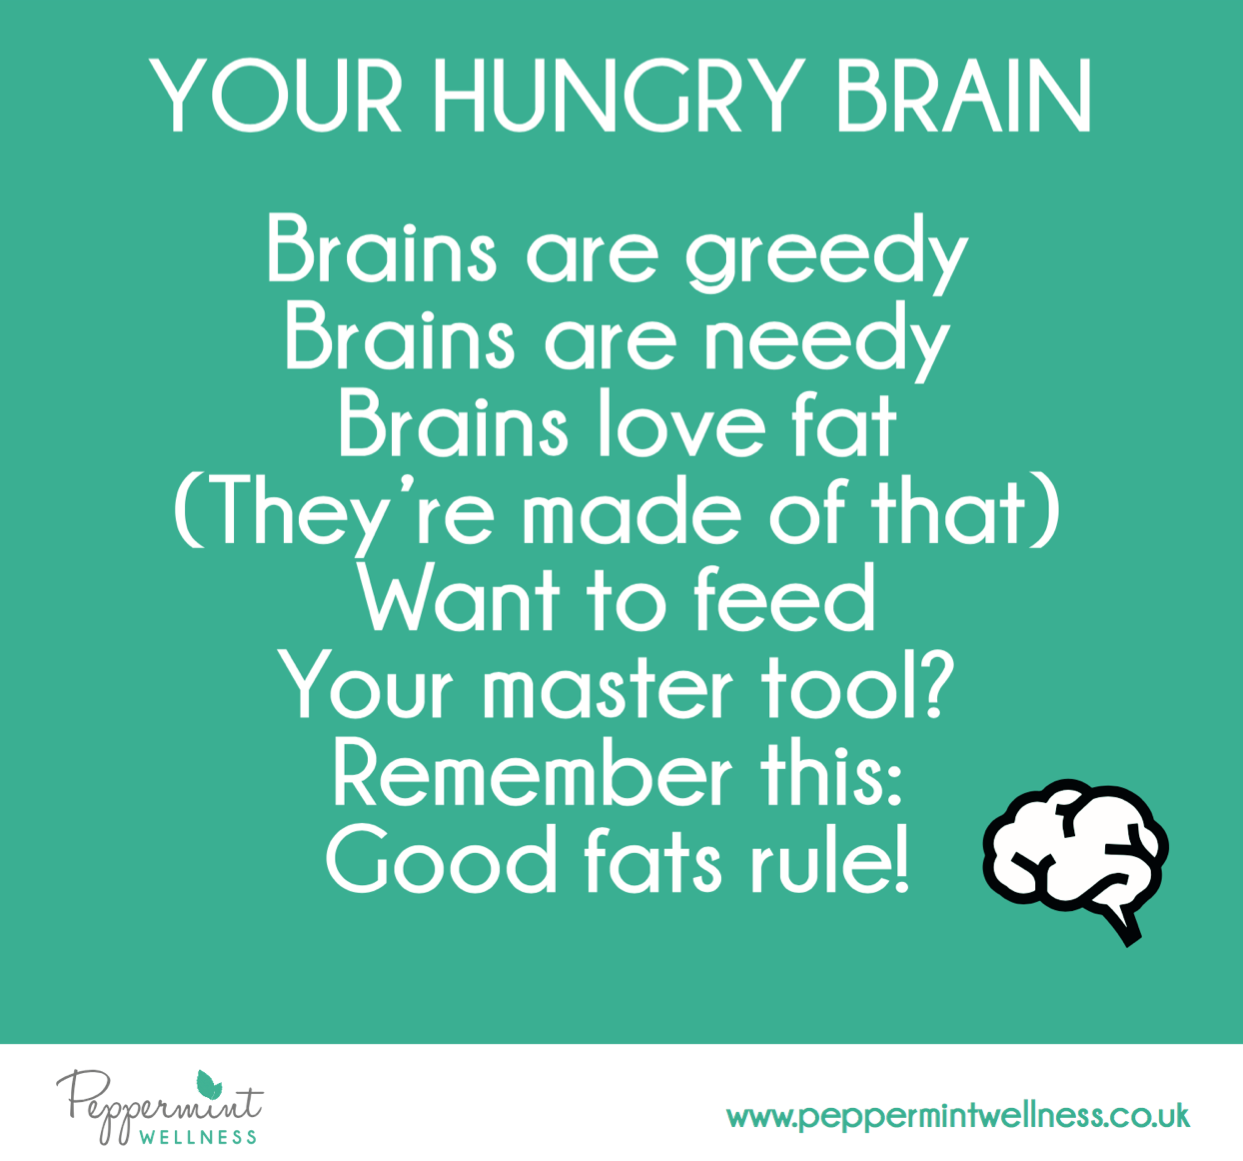 Your Hungry Brain by Peppermint Wellness